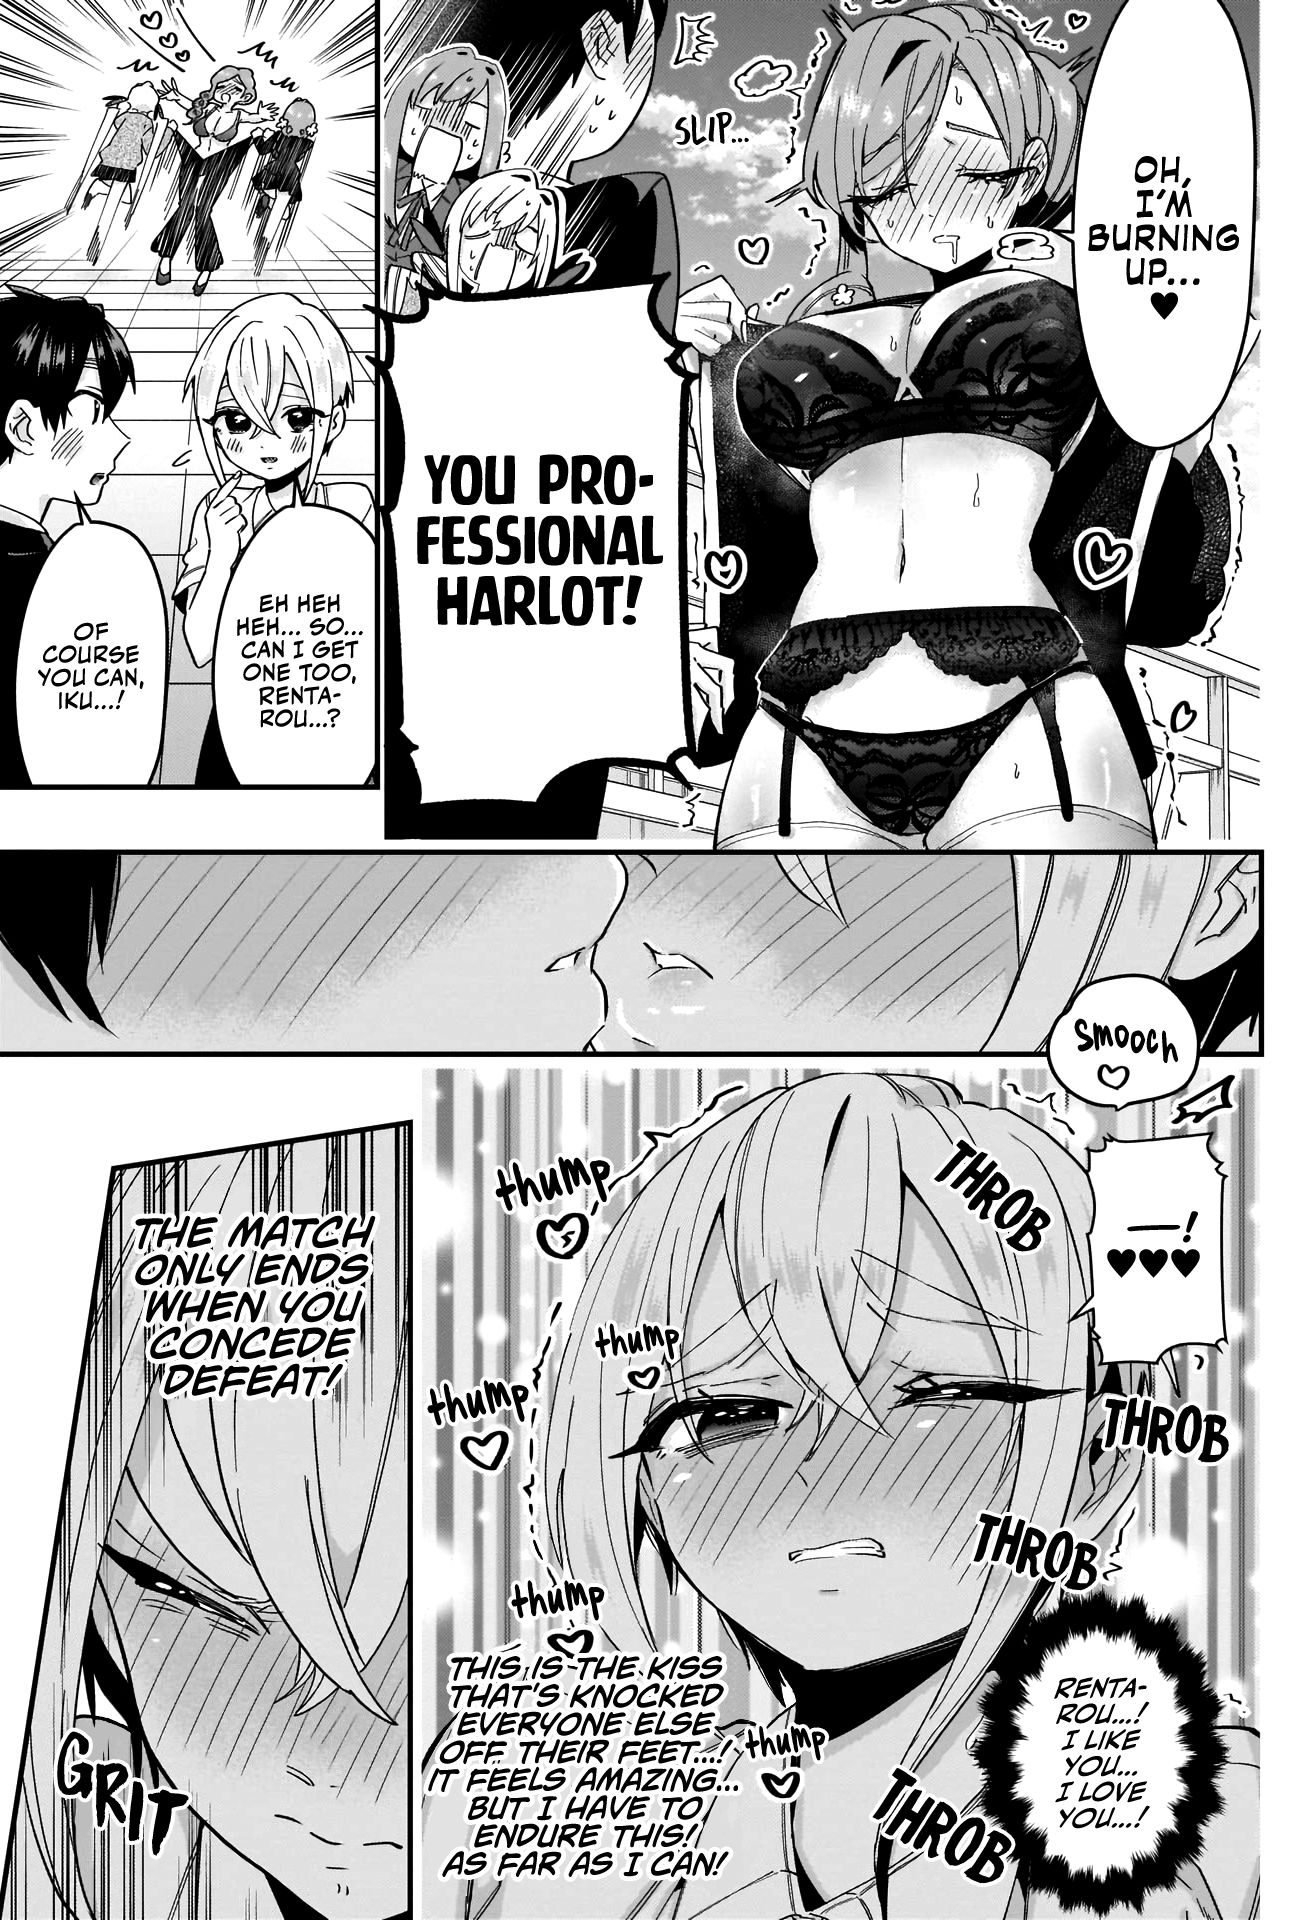 Read The 100 Girlfriends Who Really, Really, Really, Really, Really Love  You Manga English [New Chapters] Online Free - MangaClash